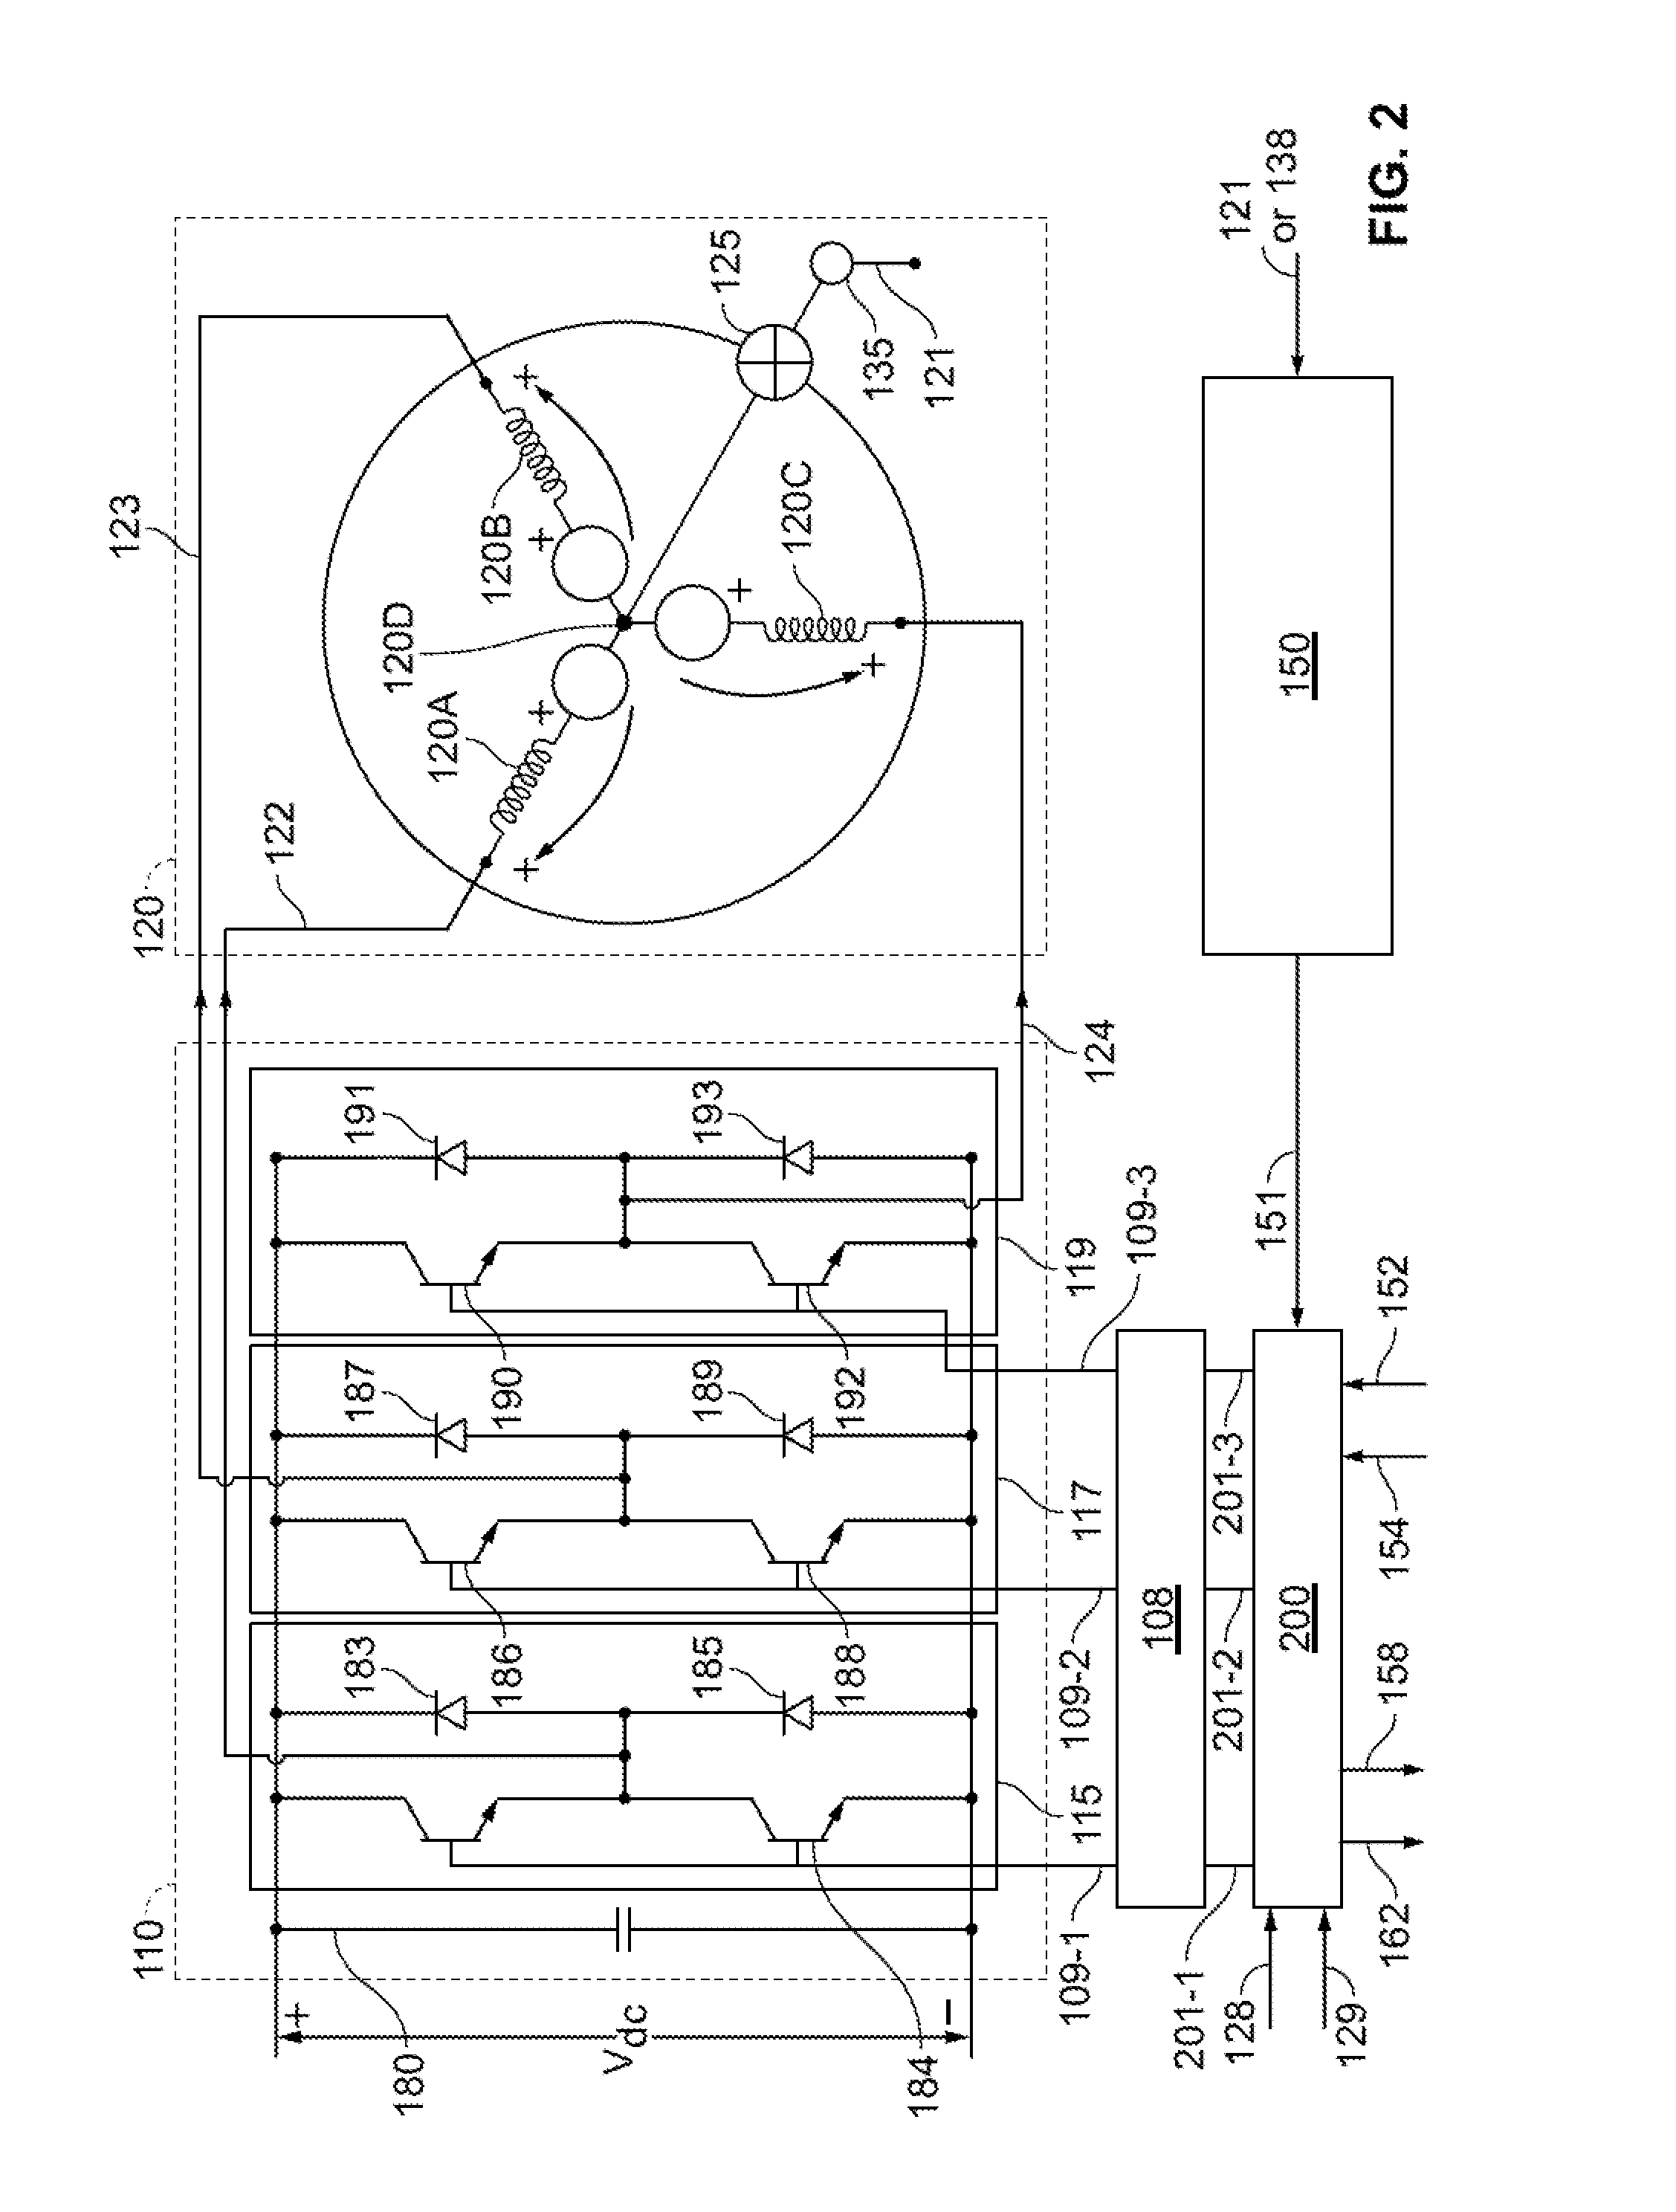 Method and system for estimating electrical angular speed of a permanent magnet machine